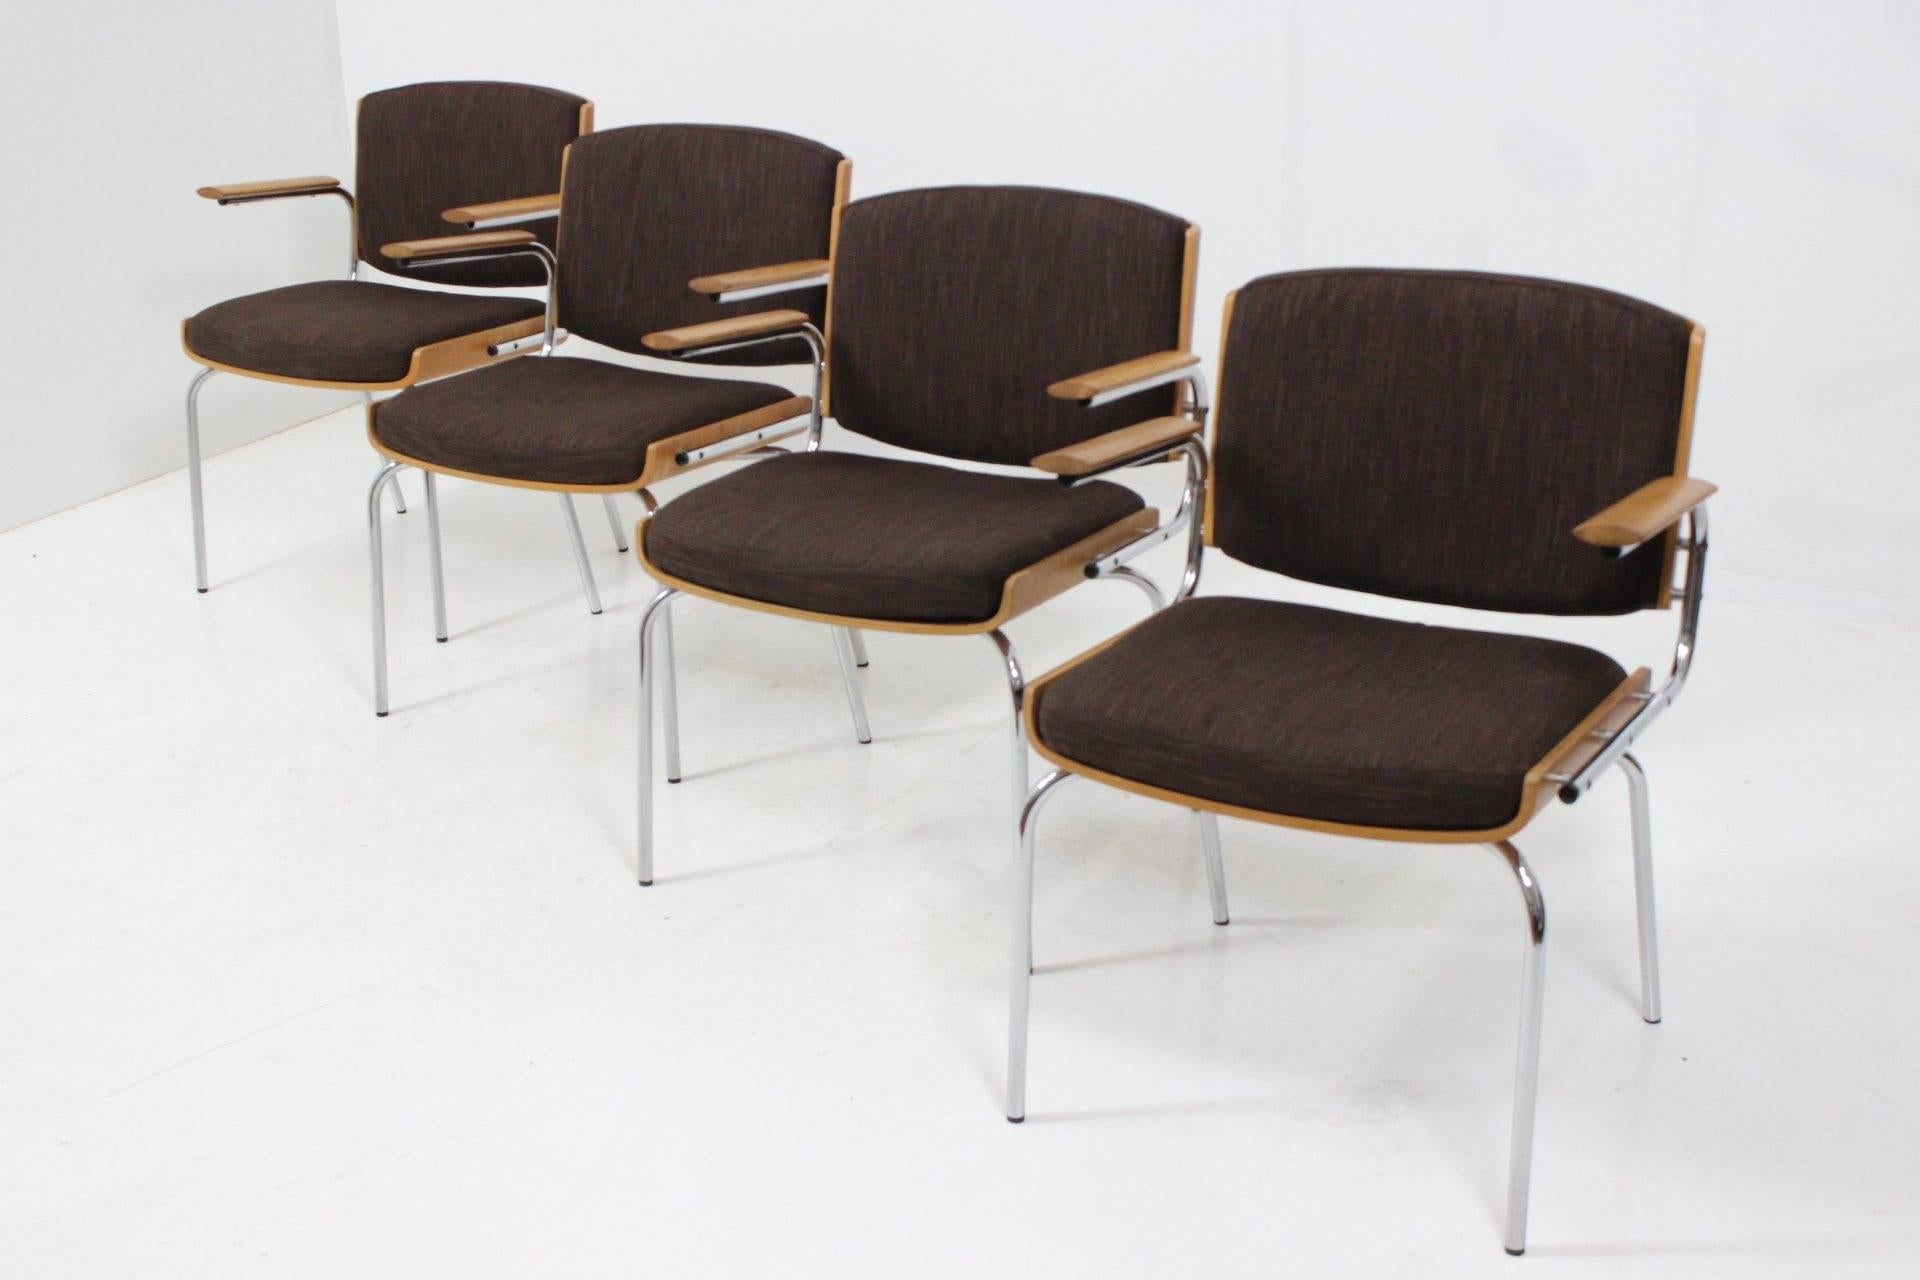 A set of four dining chairs manufactured by Duba Møbelindustri featuring tubular legs and armrest in chromed steel and seat and backrest in bent plywood. Carefully restored, updated upholstery, very good healthy condition.